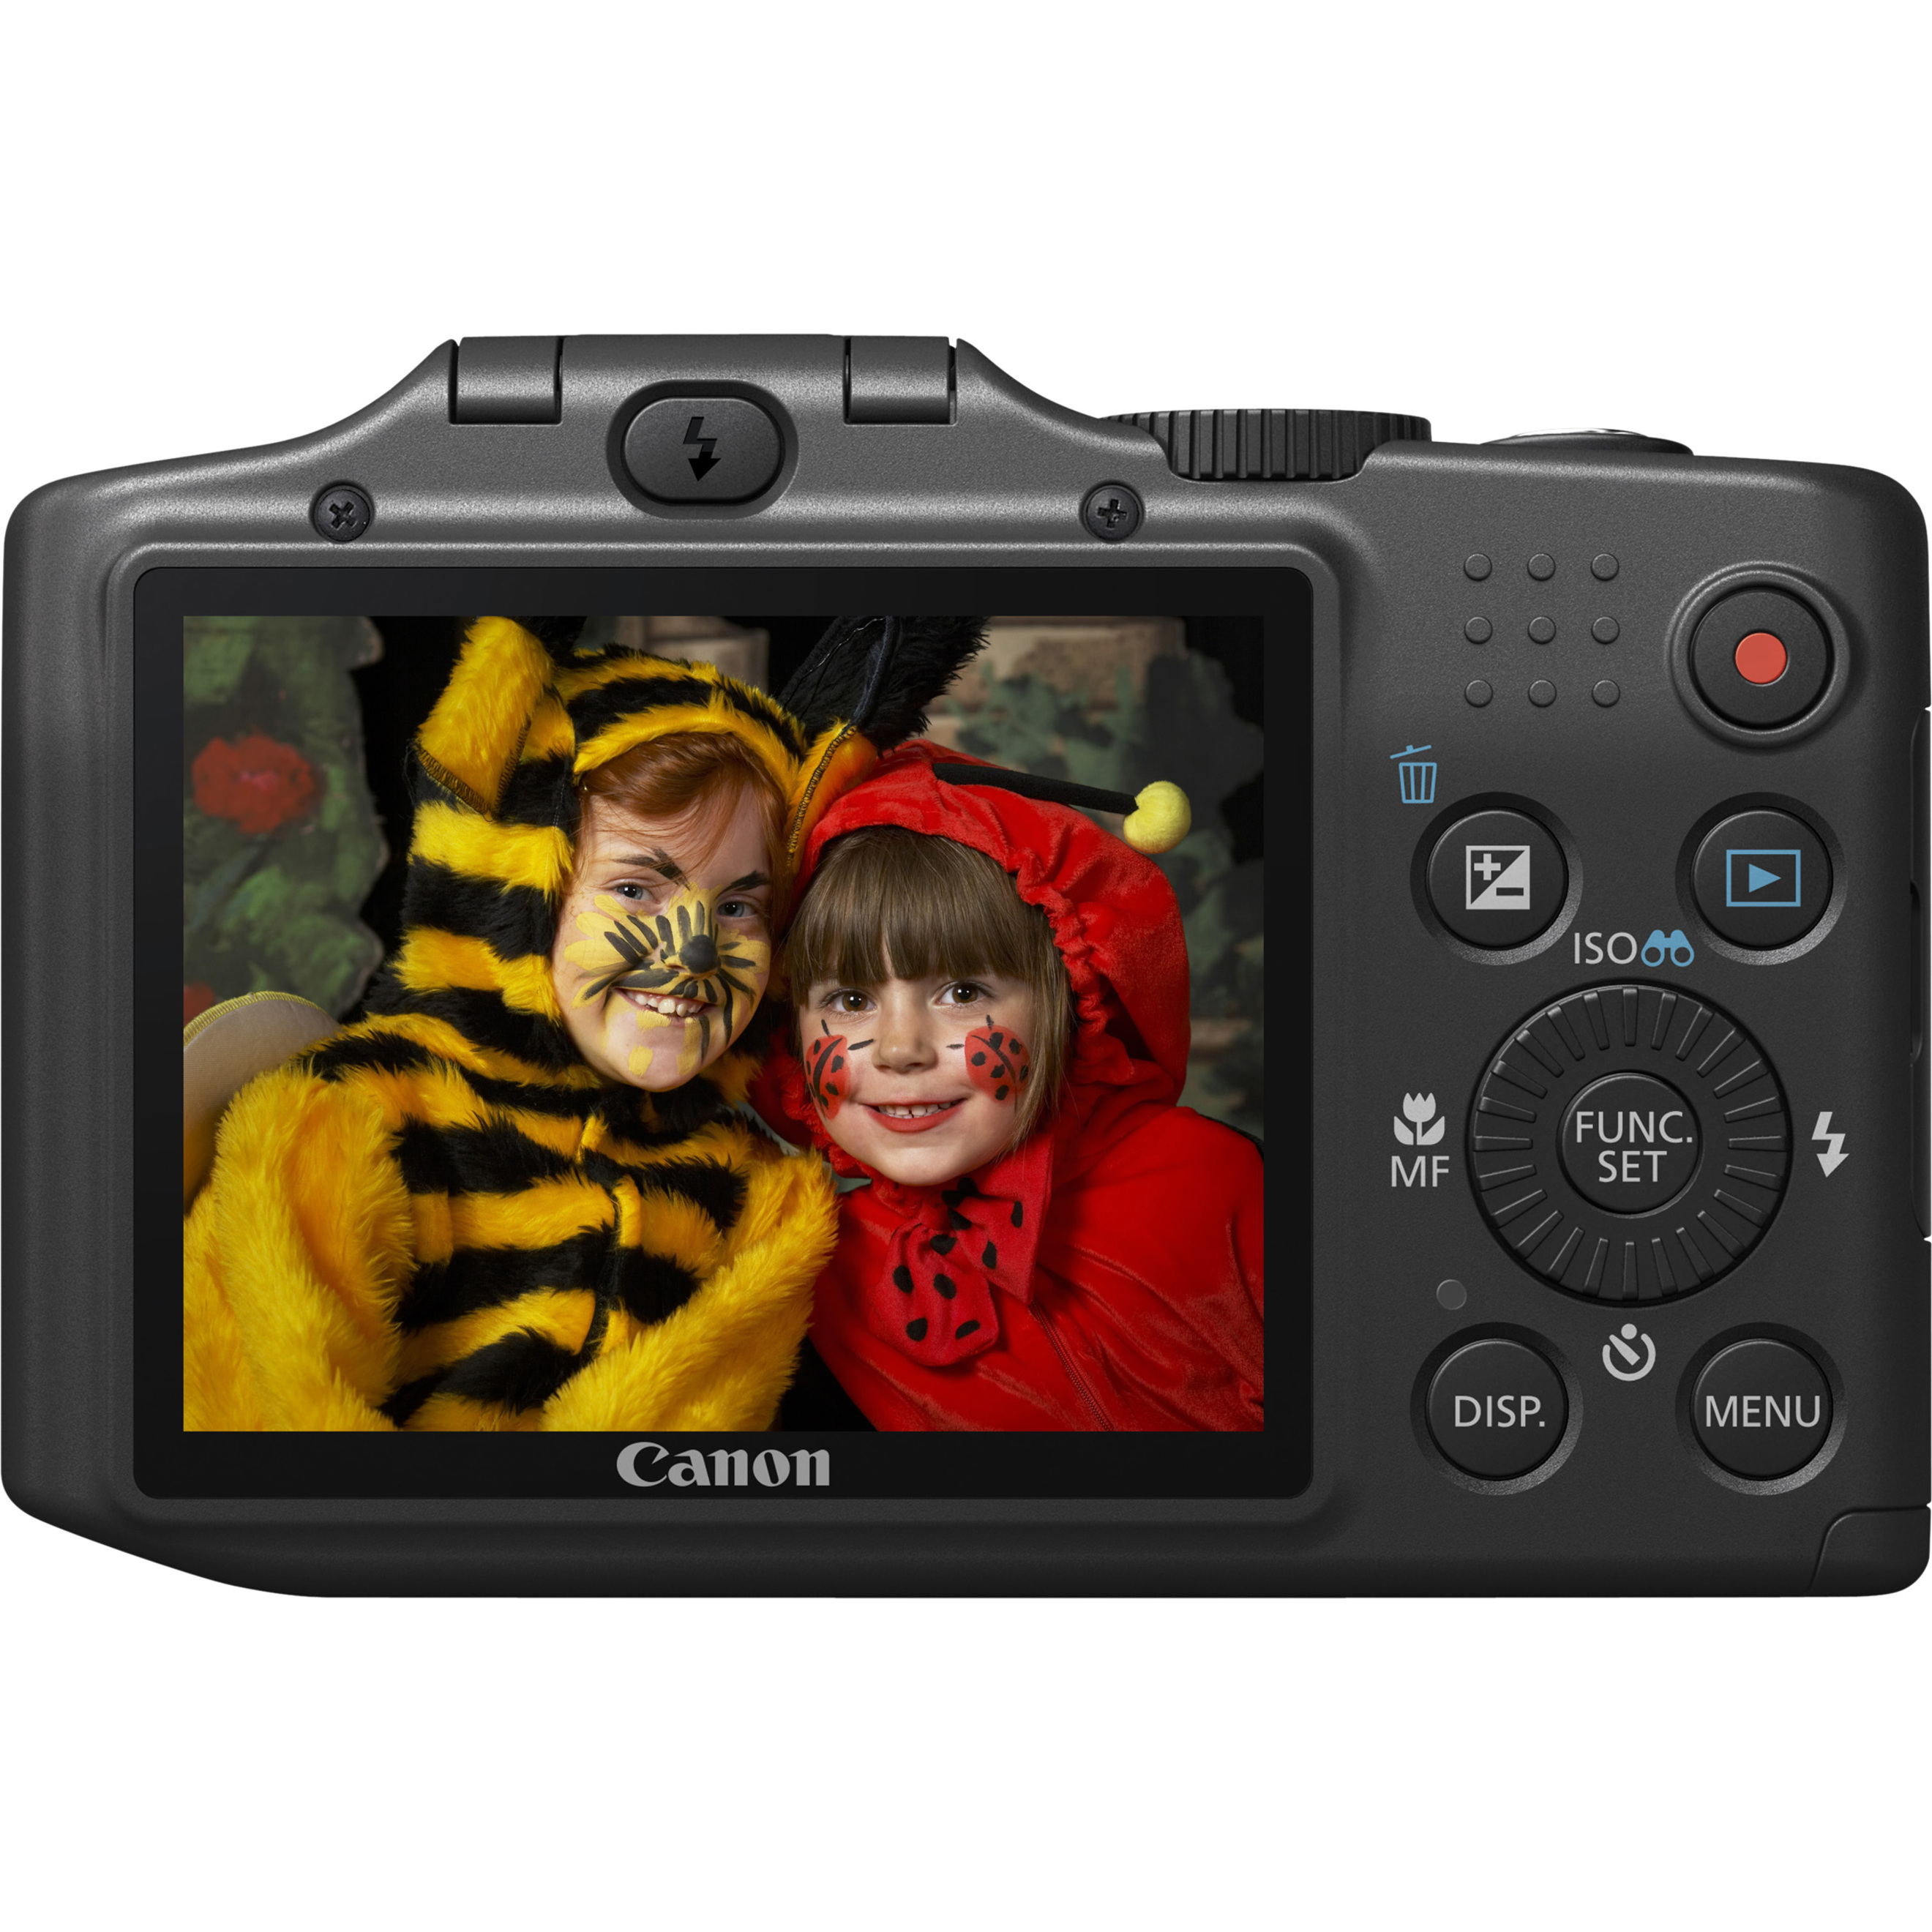 Canon PowerShot SX160 IS 16 Megapixel Compact Camera, Black - image 2 of 4